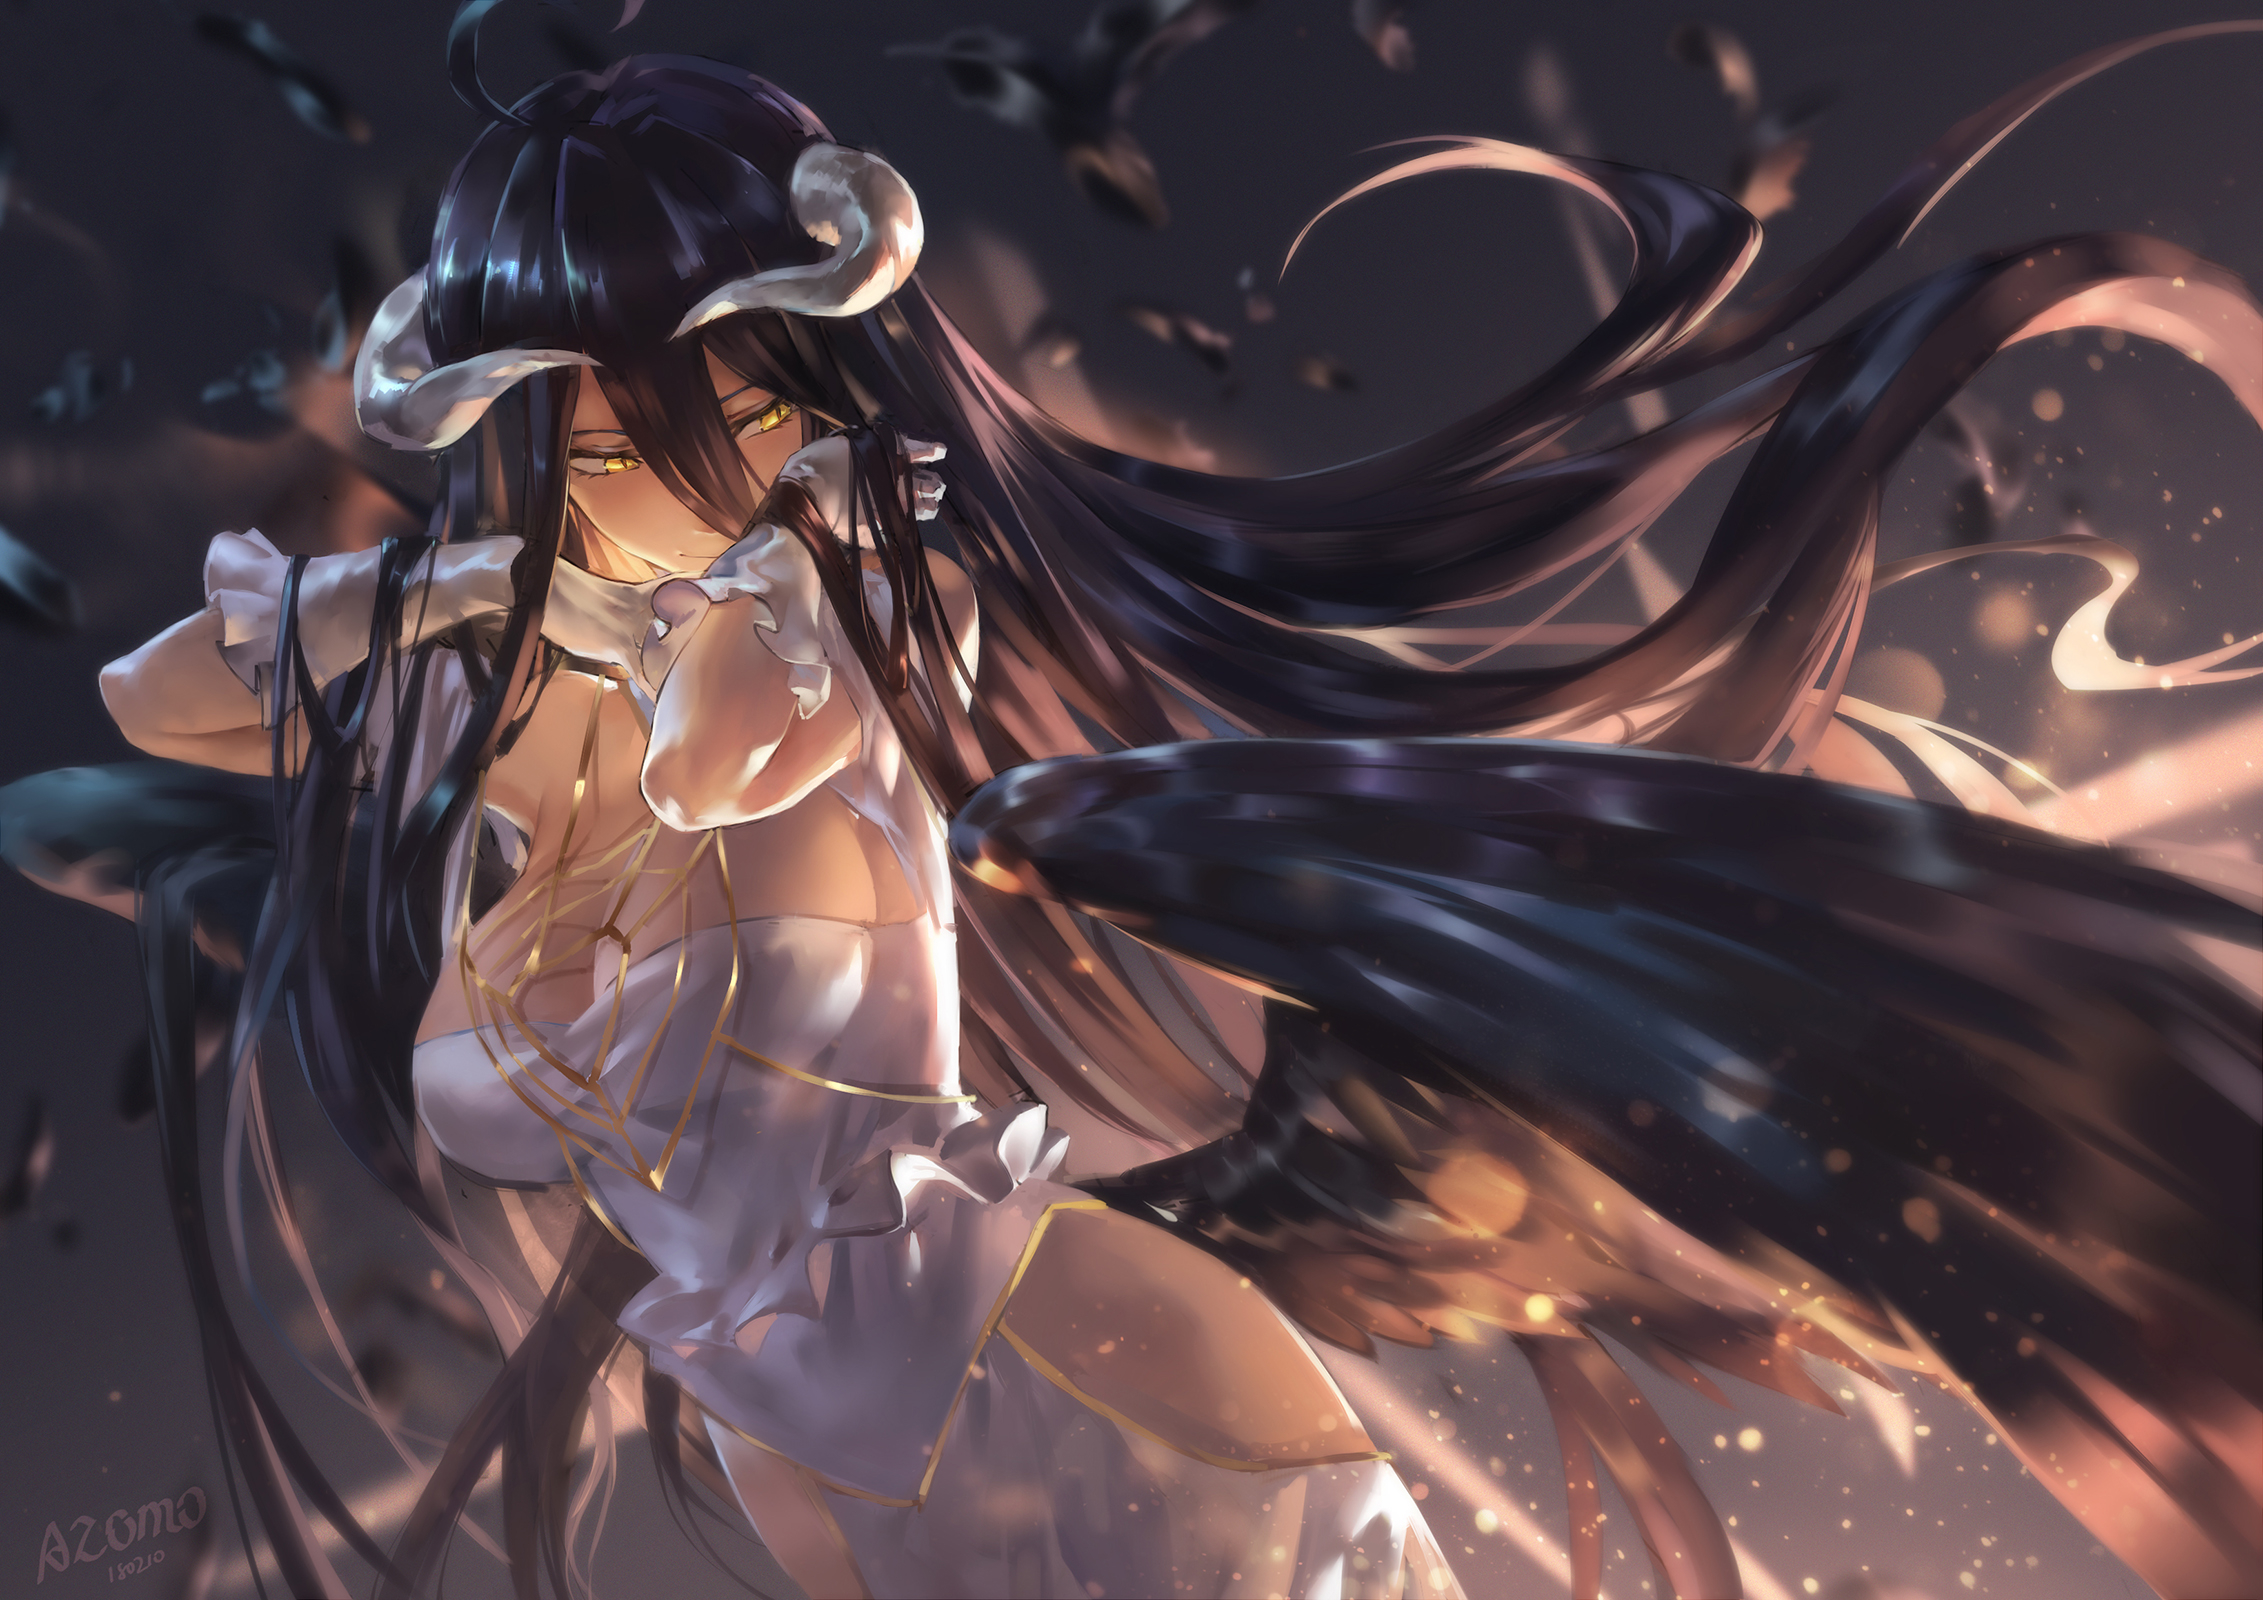 2263x1600 Wallpaper : Albedo OverLord, Overlord anime, cleavage, white dress, horns, Black wings, white gloves, yellow eyes, black hair, long hair, azomo, avamone Noxxic 1244327 HD Wallpapers